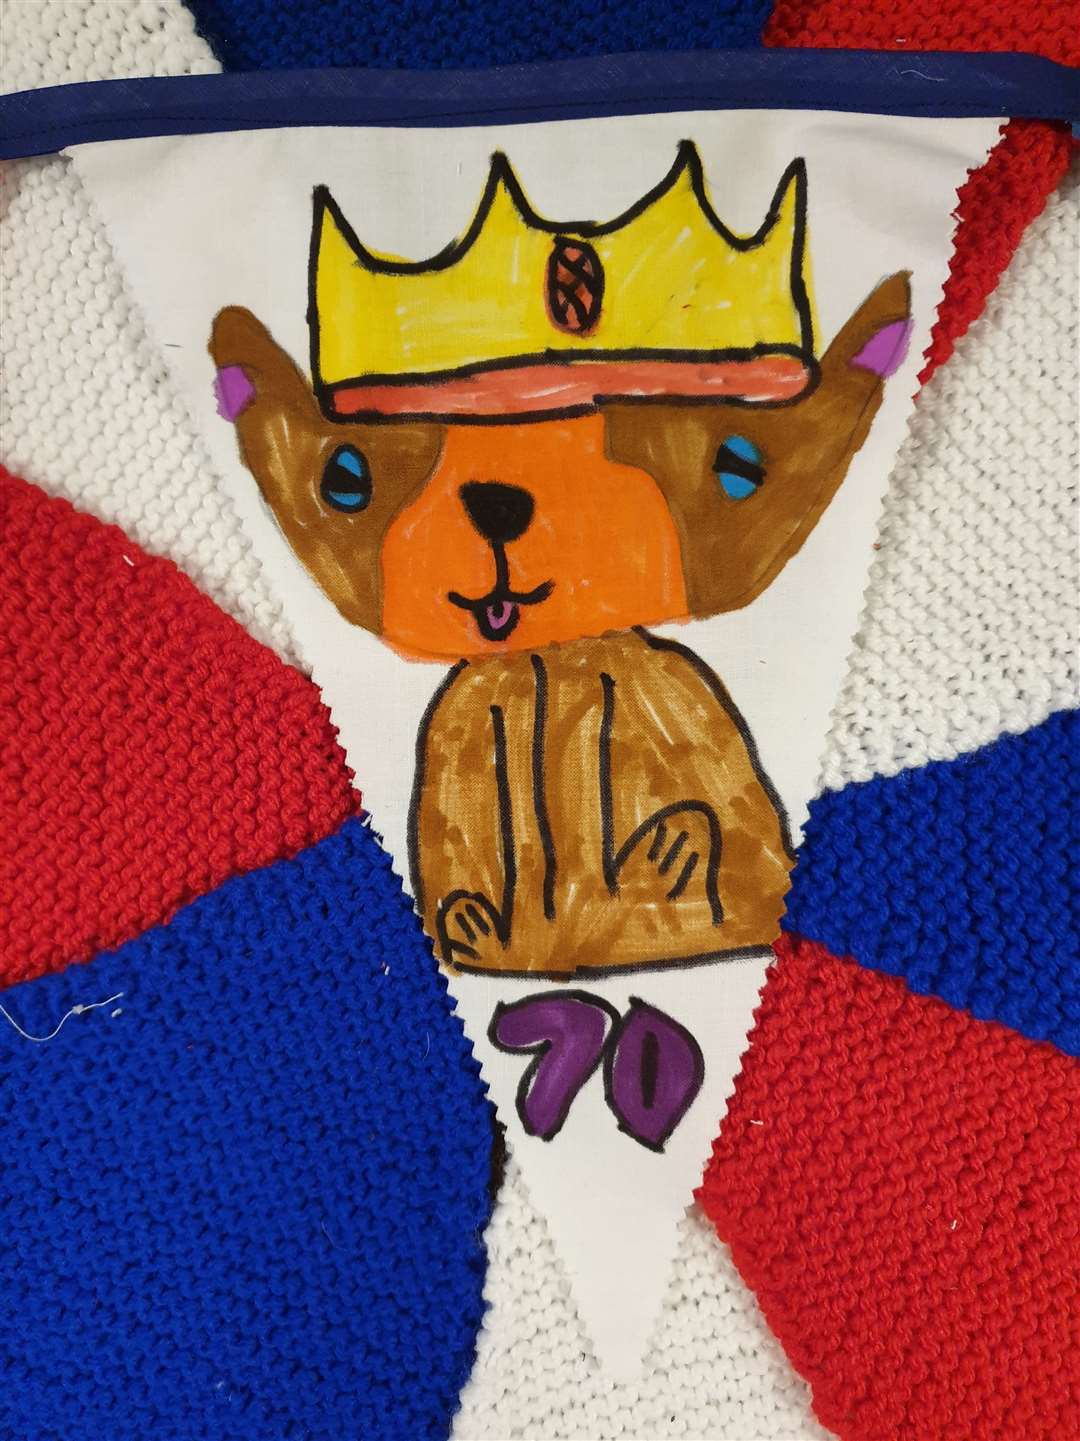 A Royal corgi complete with crown is shown in this piece of bunting